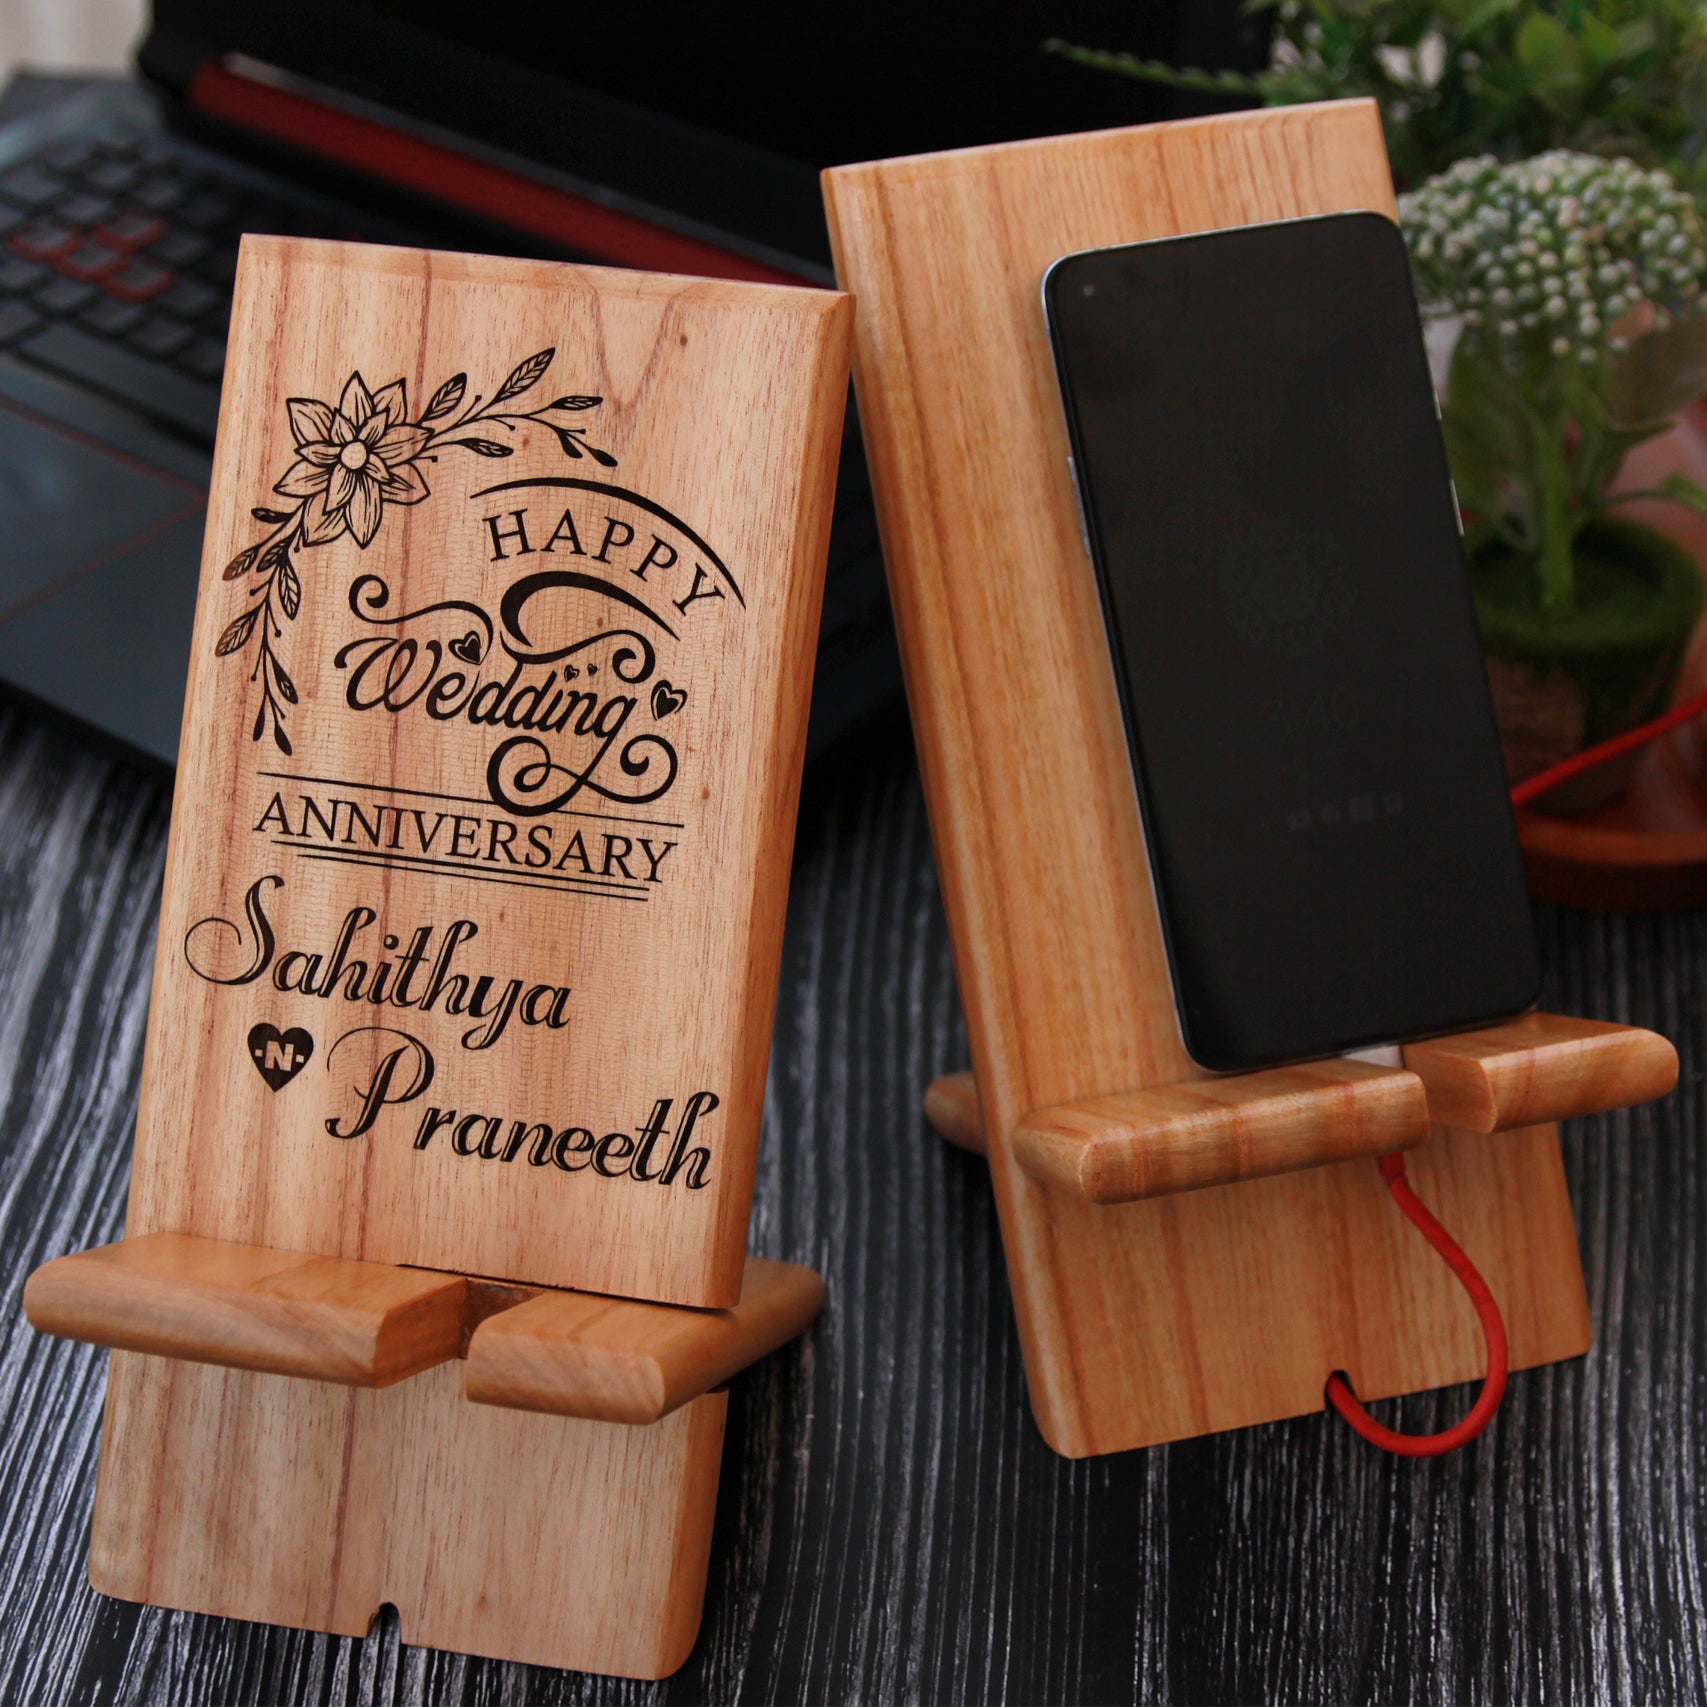 Engraved Wooden Mobile Phone Stand | Wedding Anniversary Gift